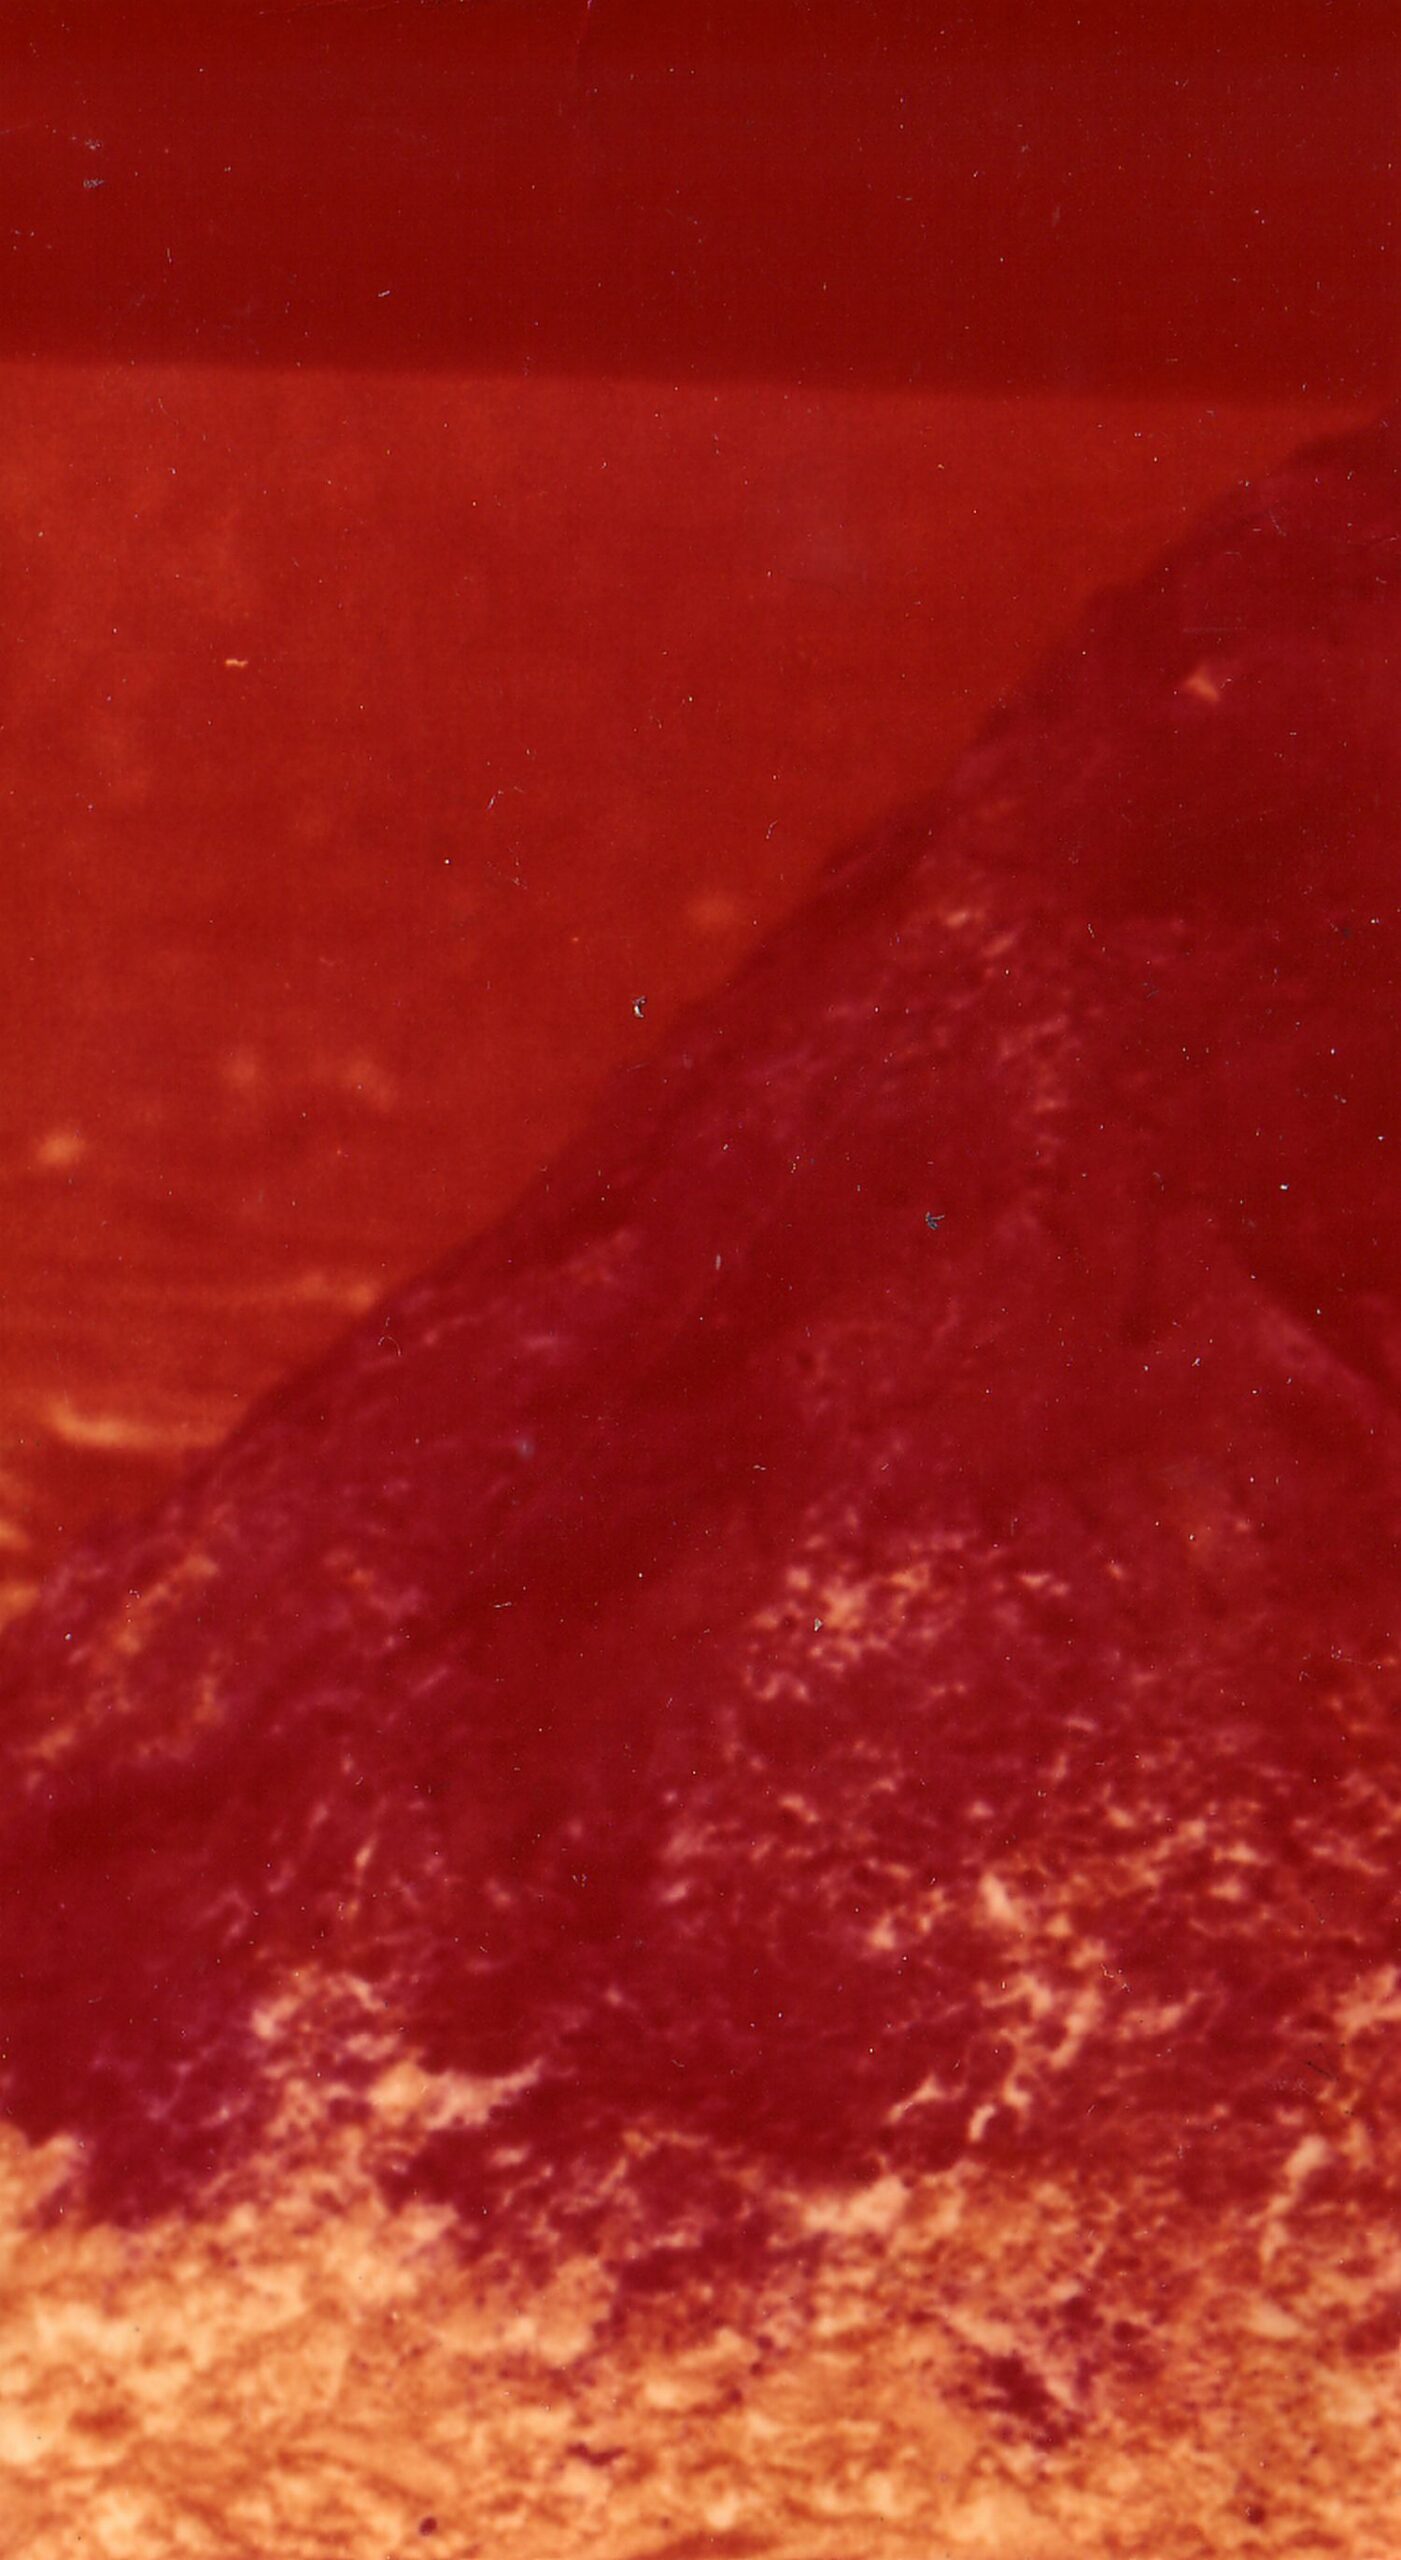 Red Mound sits on Red Field with Red Sky